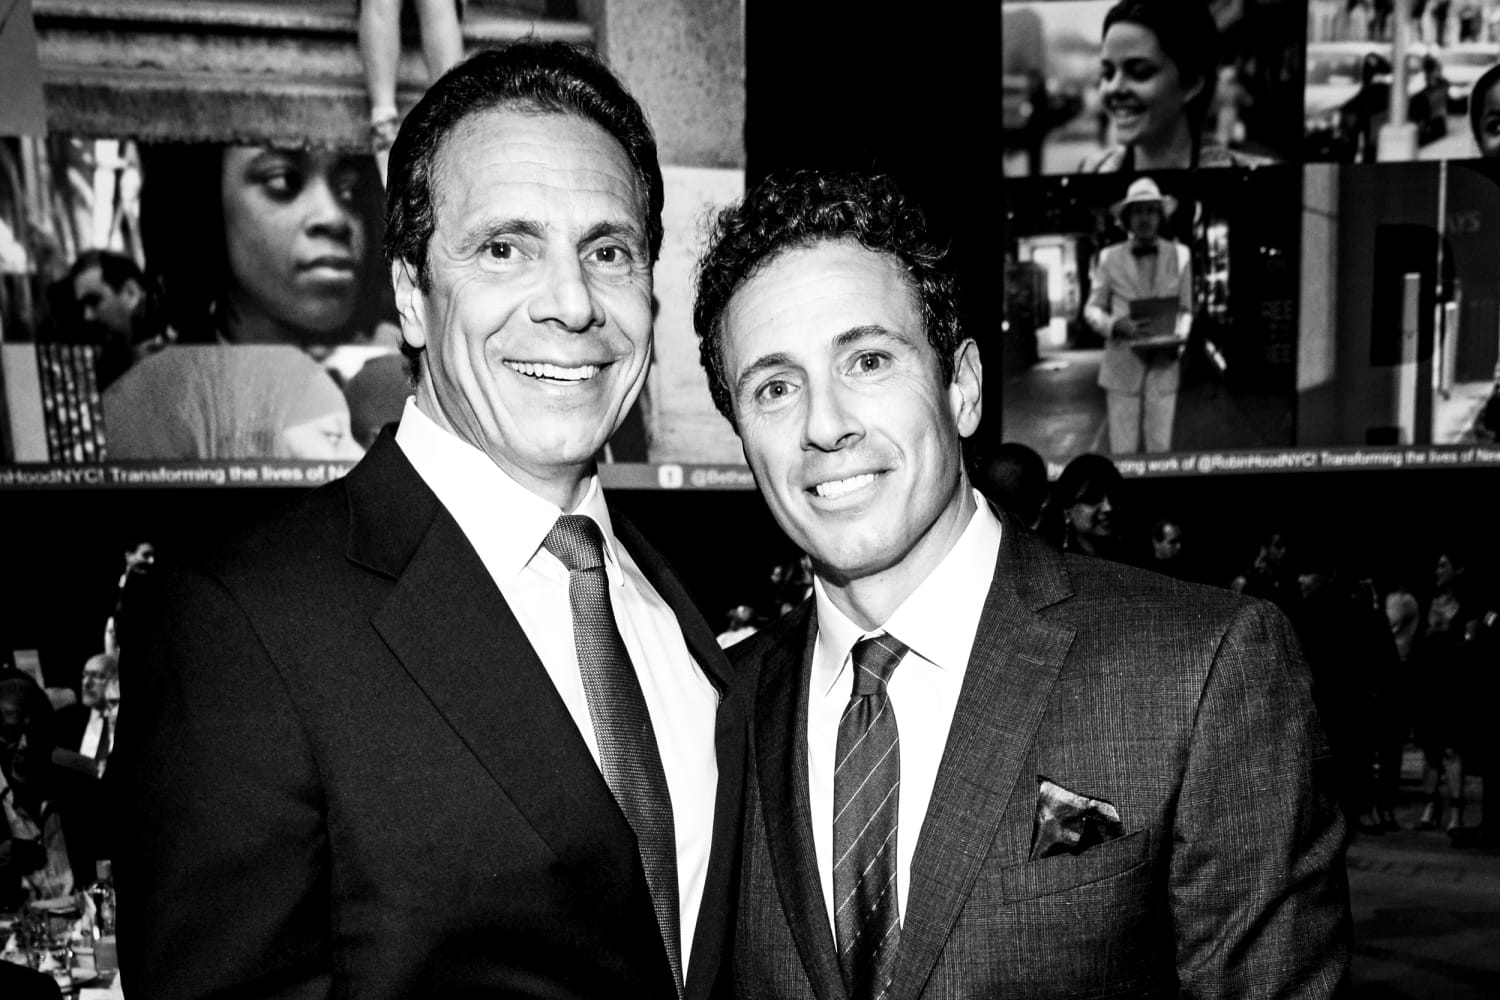 More-details-revealed-about-Chris-Cuomo's-role-as--advisor-to-brother,-former-governor-